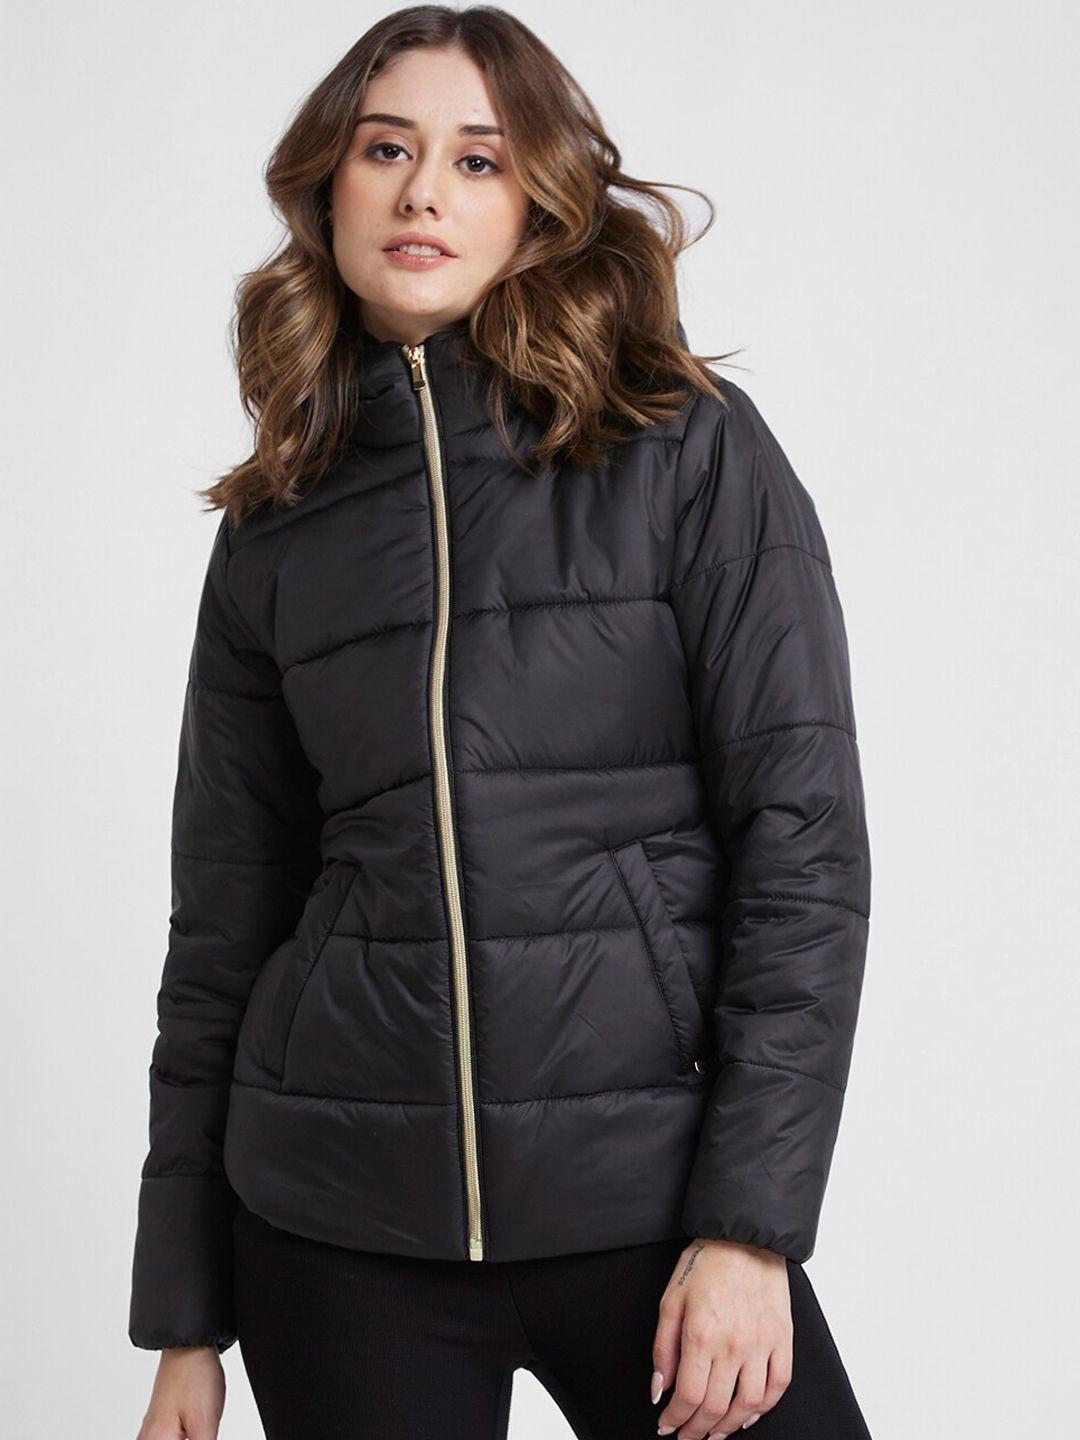 spykar stand collar padded jacket with zip detailing